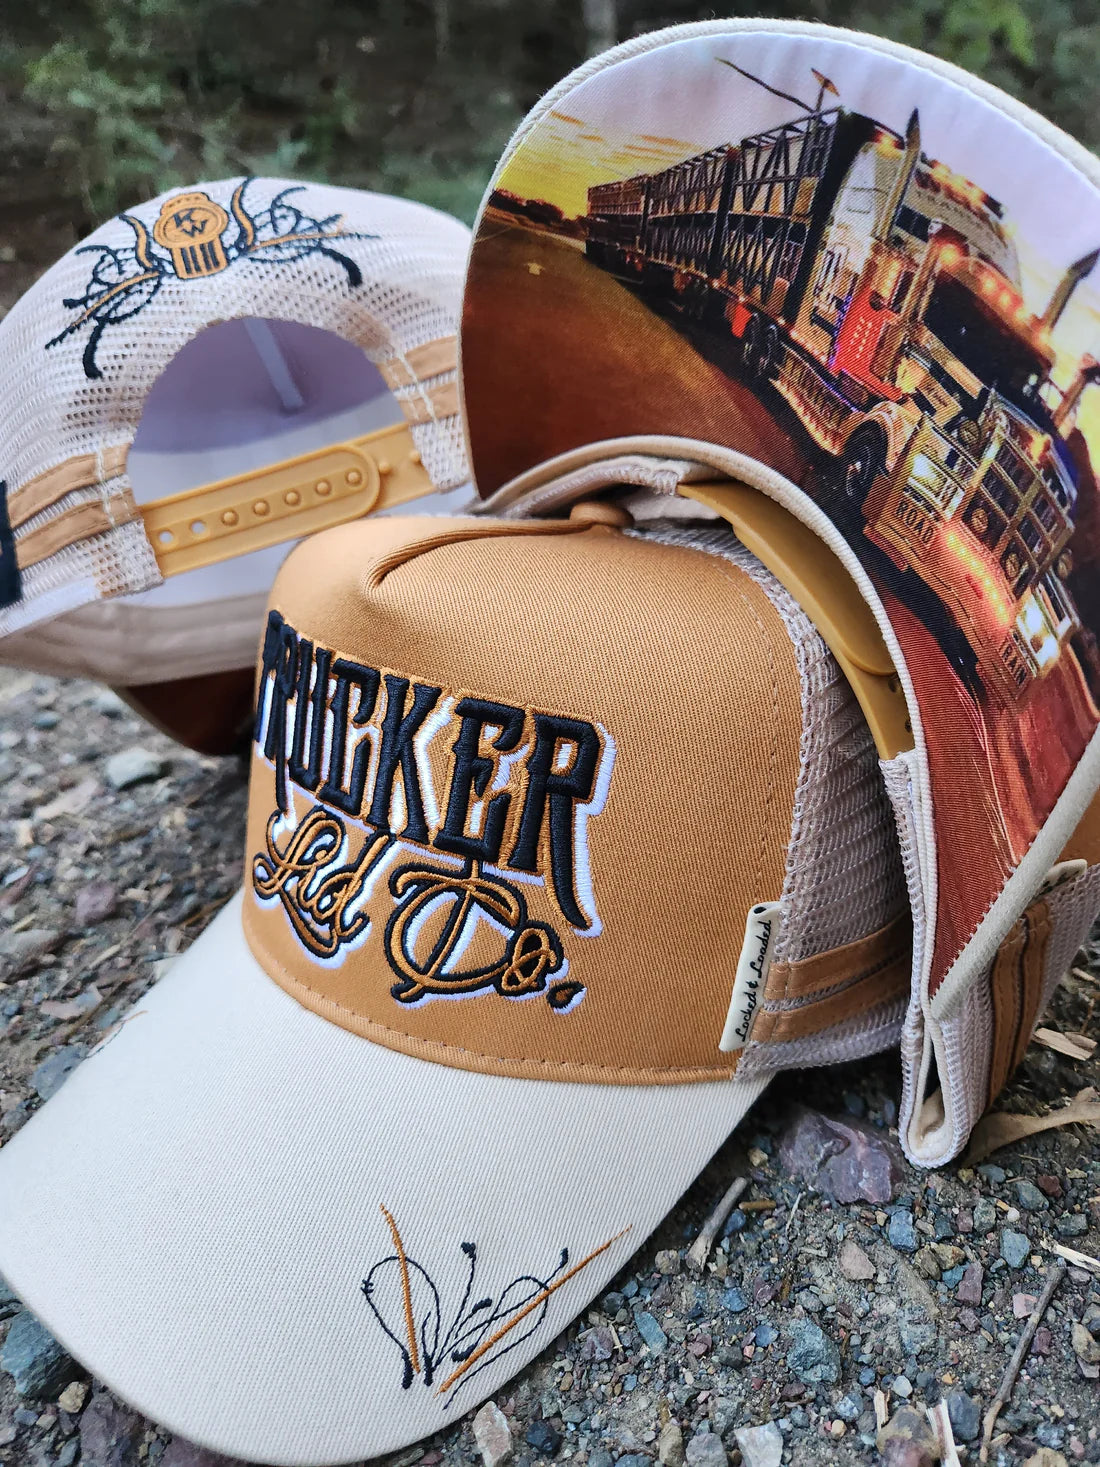 Trucker Lid Co Locked and Loaded